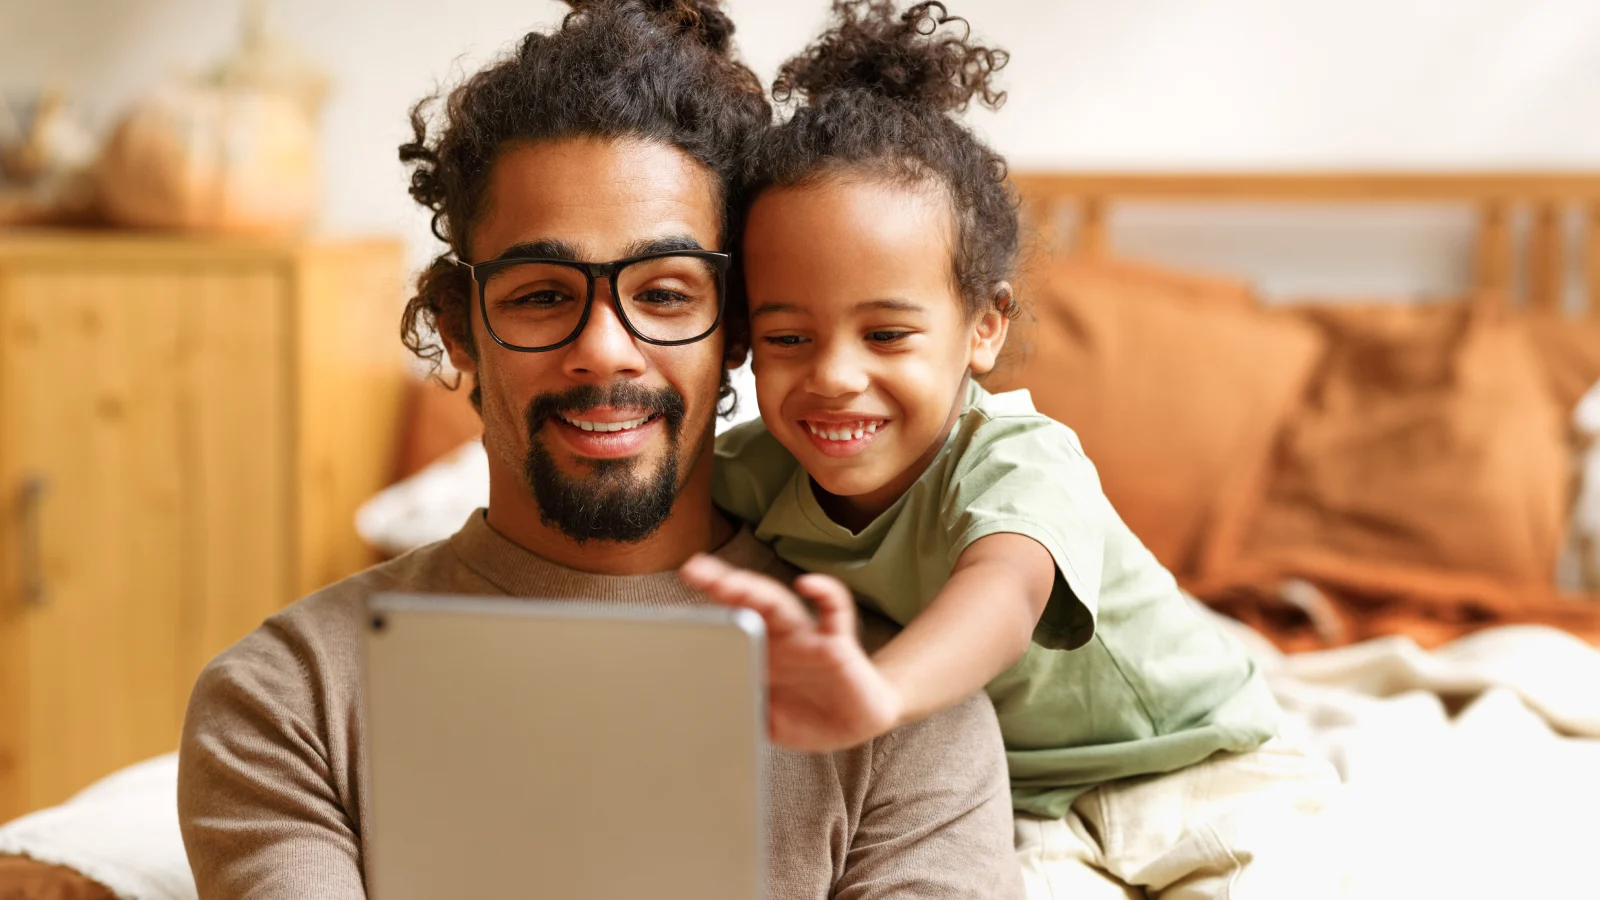 A secure, personalized online platform - father and son looking at tablet